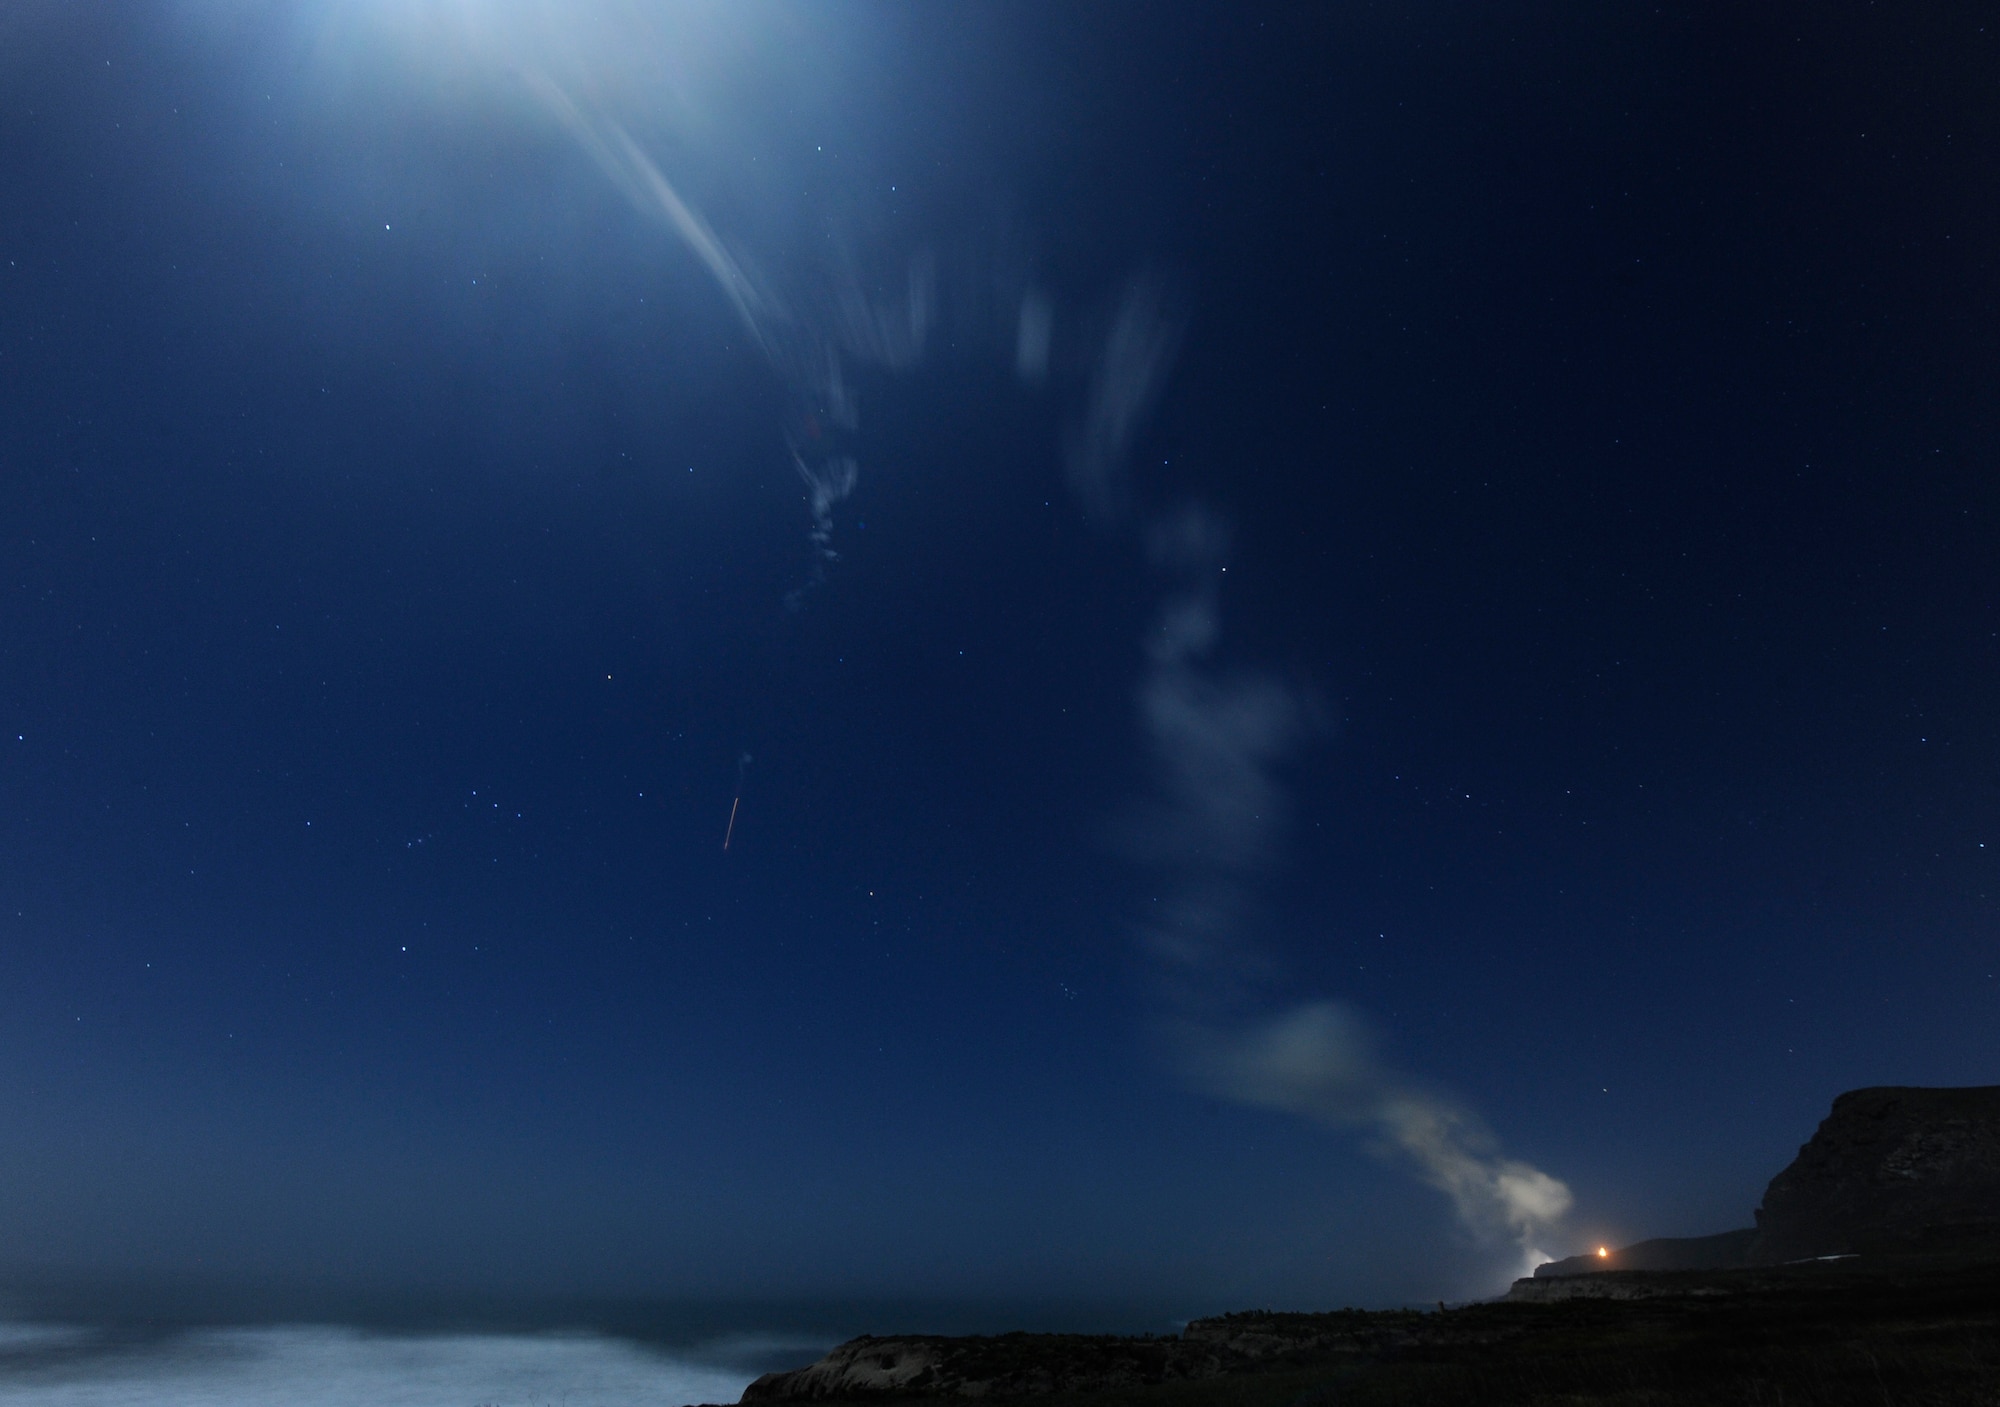 An unarmed Minuteman III intercontinental ballistic missile launches during an operational test at 11:34 p.m. PST Feb. 20, 2016, Vandenberg Air Force Base, Calif. (U.S. Air Force Photo by Michael Peterson/Released)